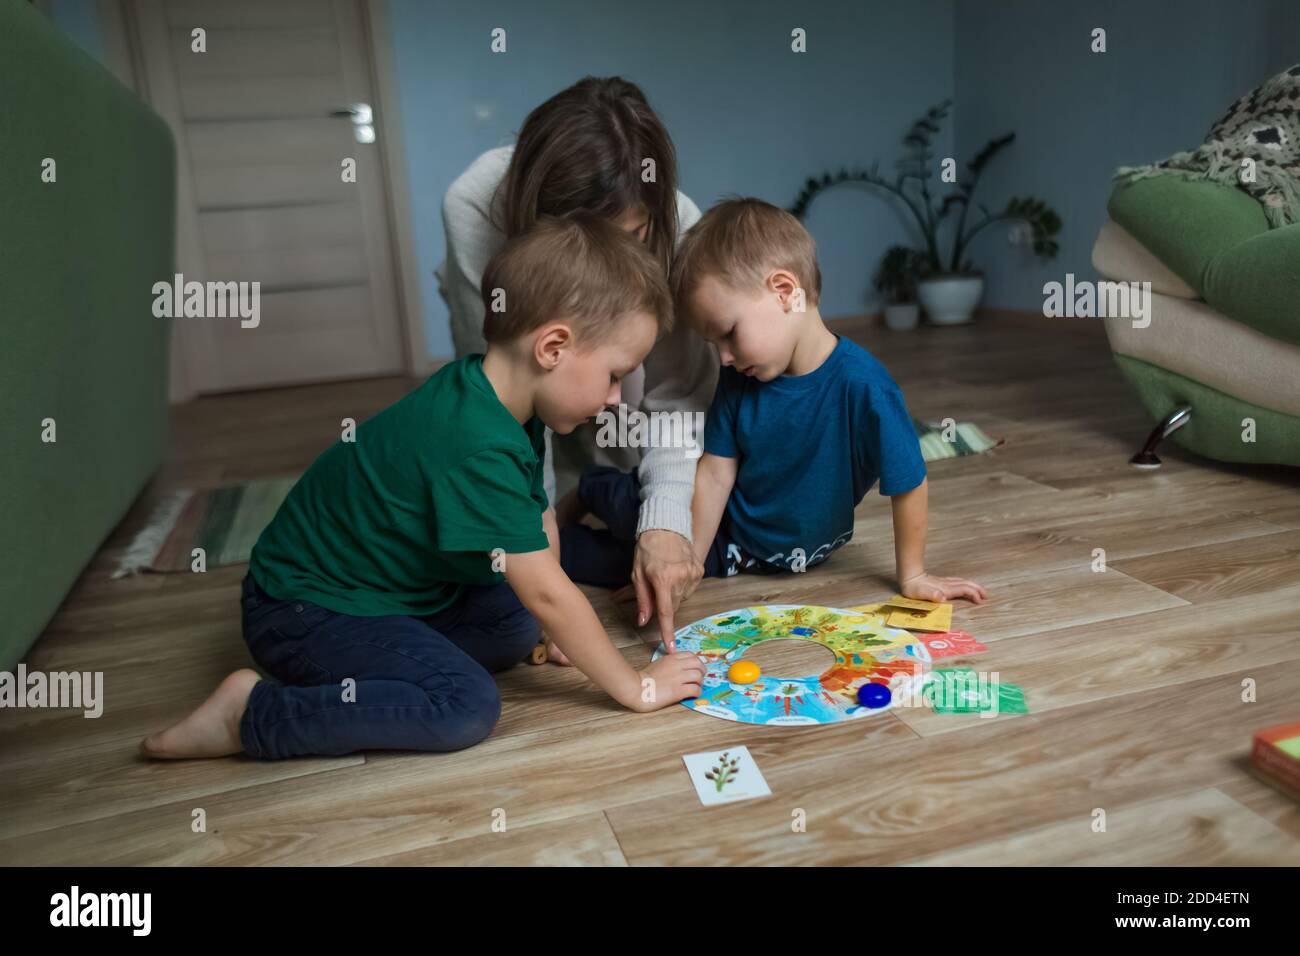 Mother with children playing a board game on the floor. Stock Photo